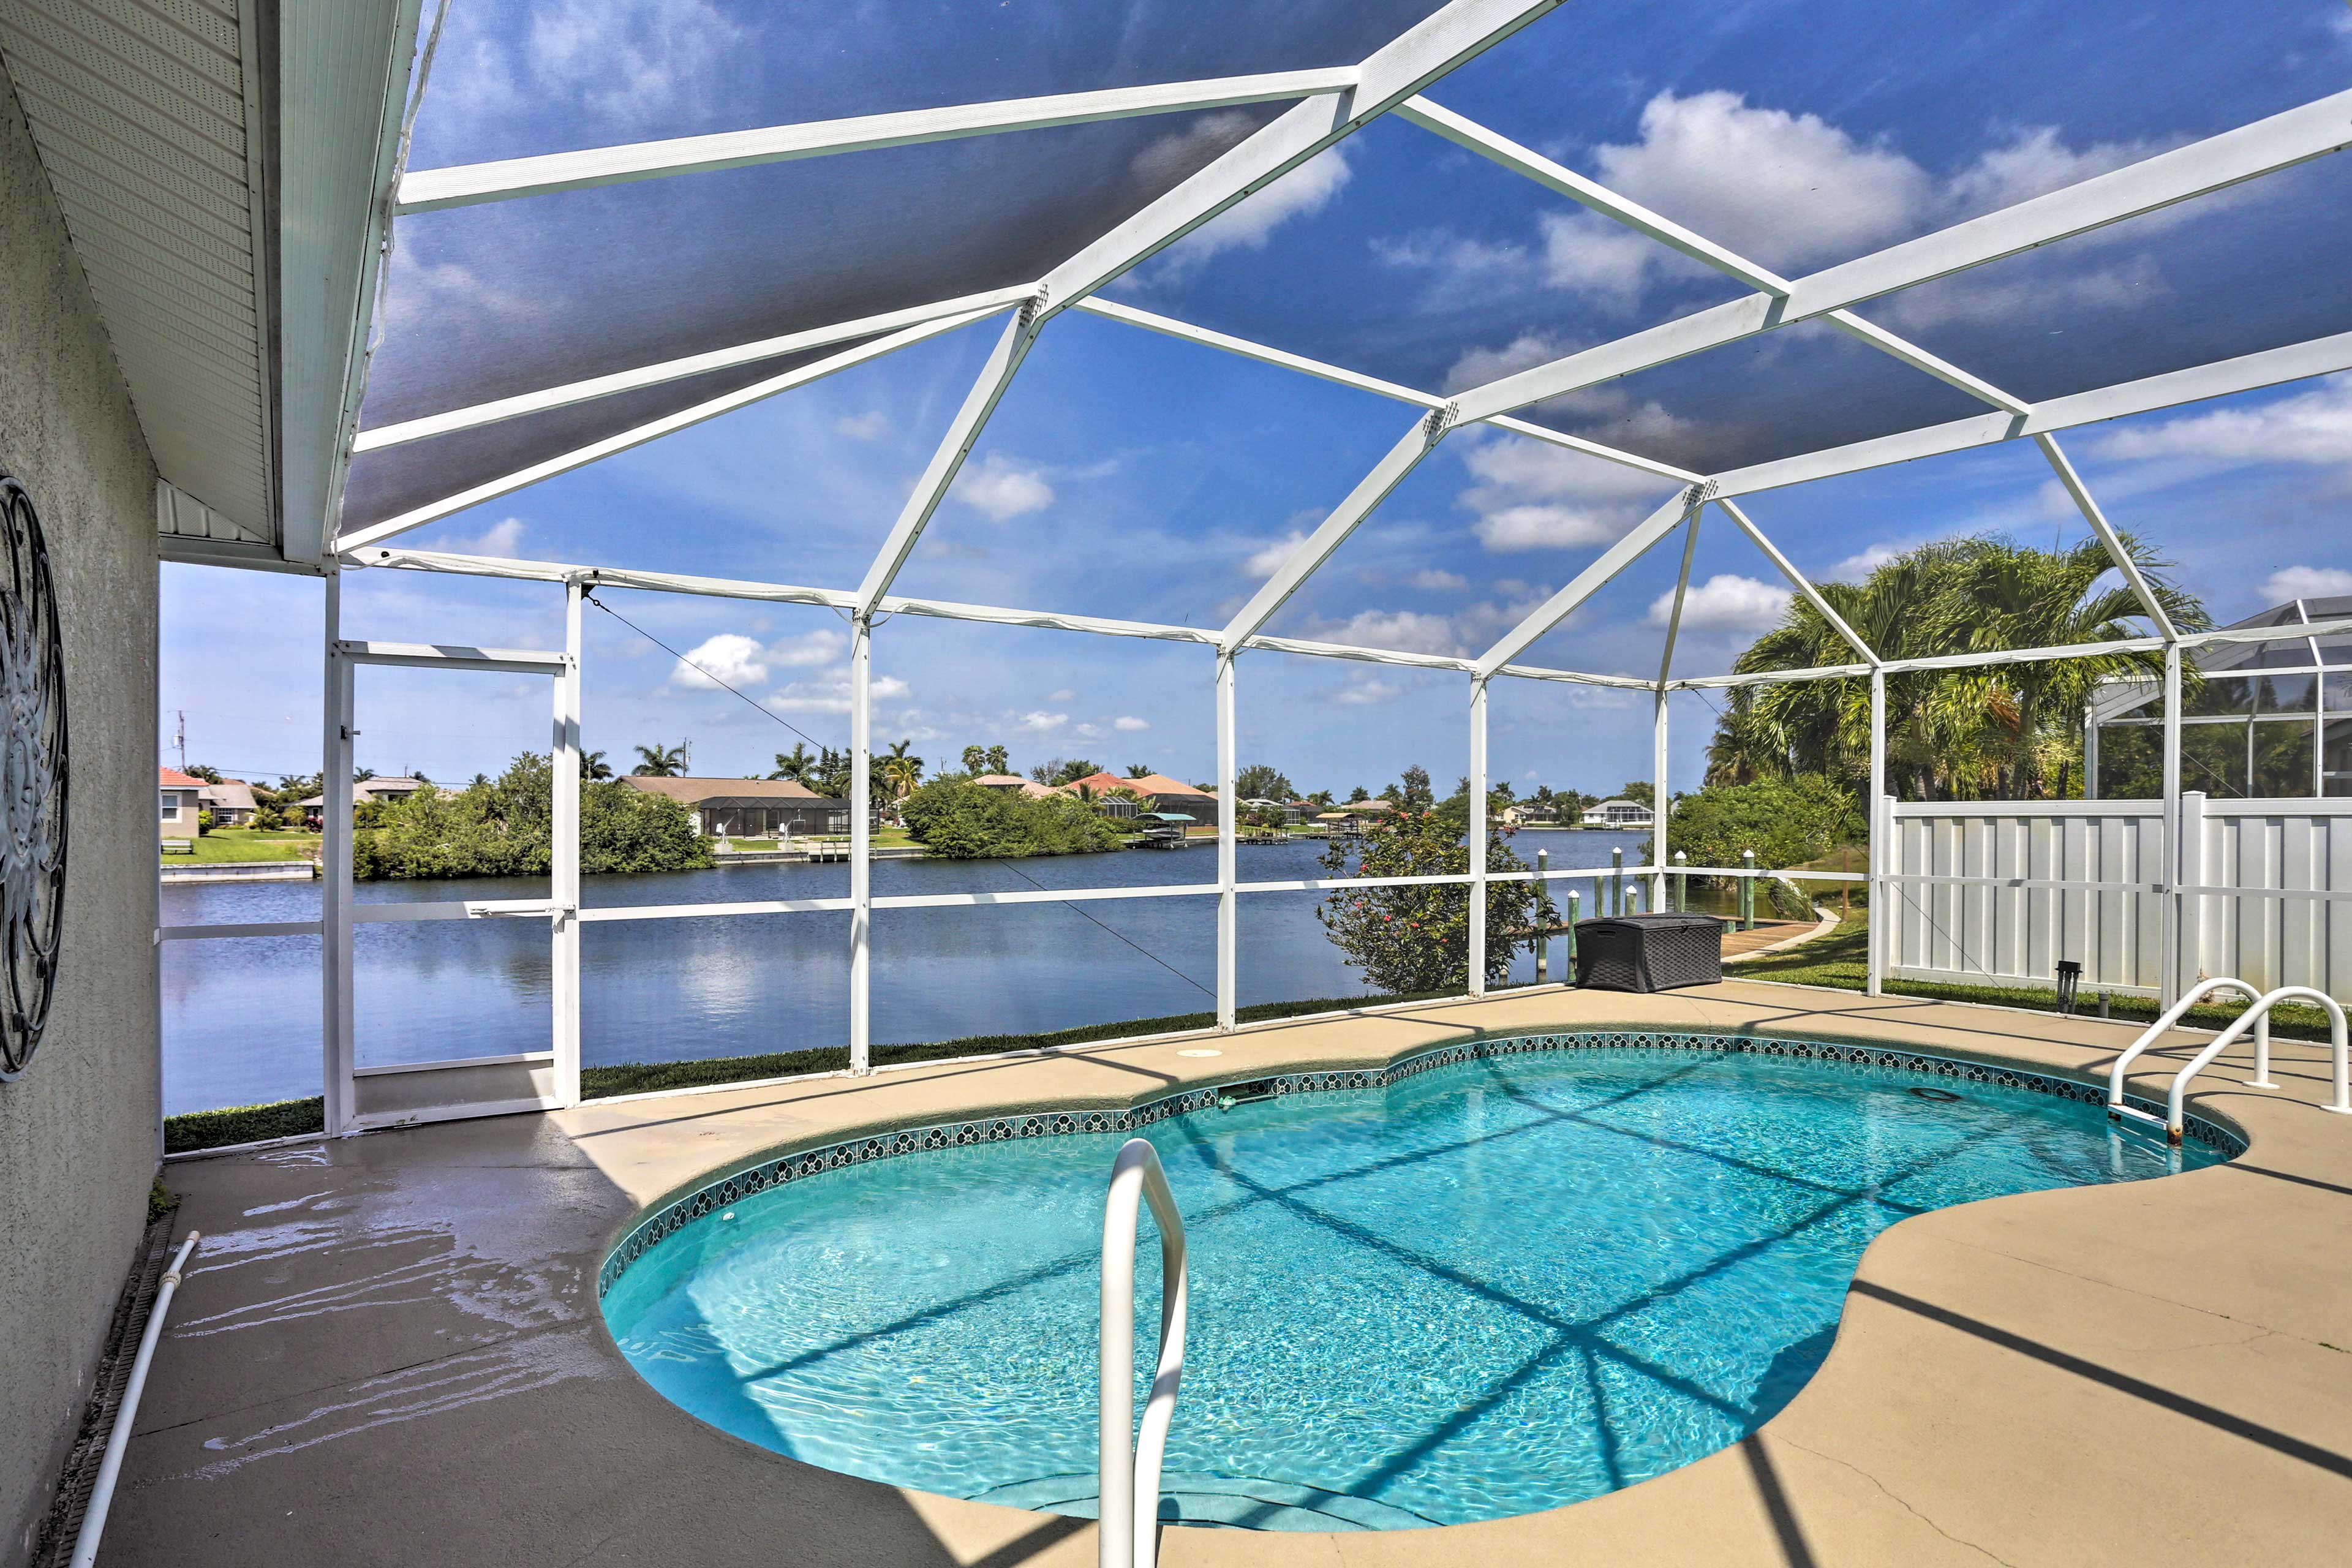 Enjoy views of the canal while you swim in the private pool.